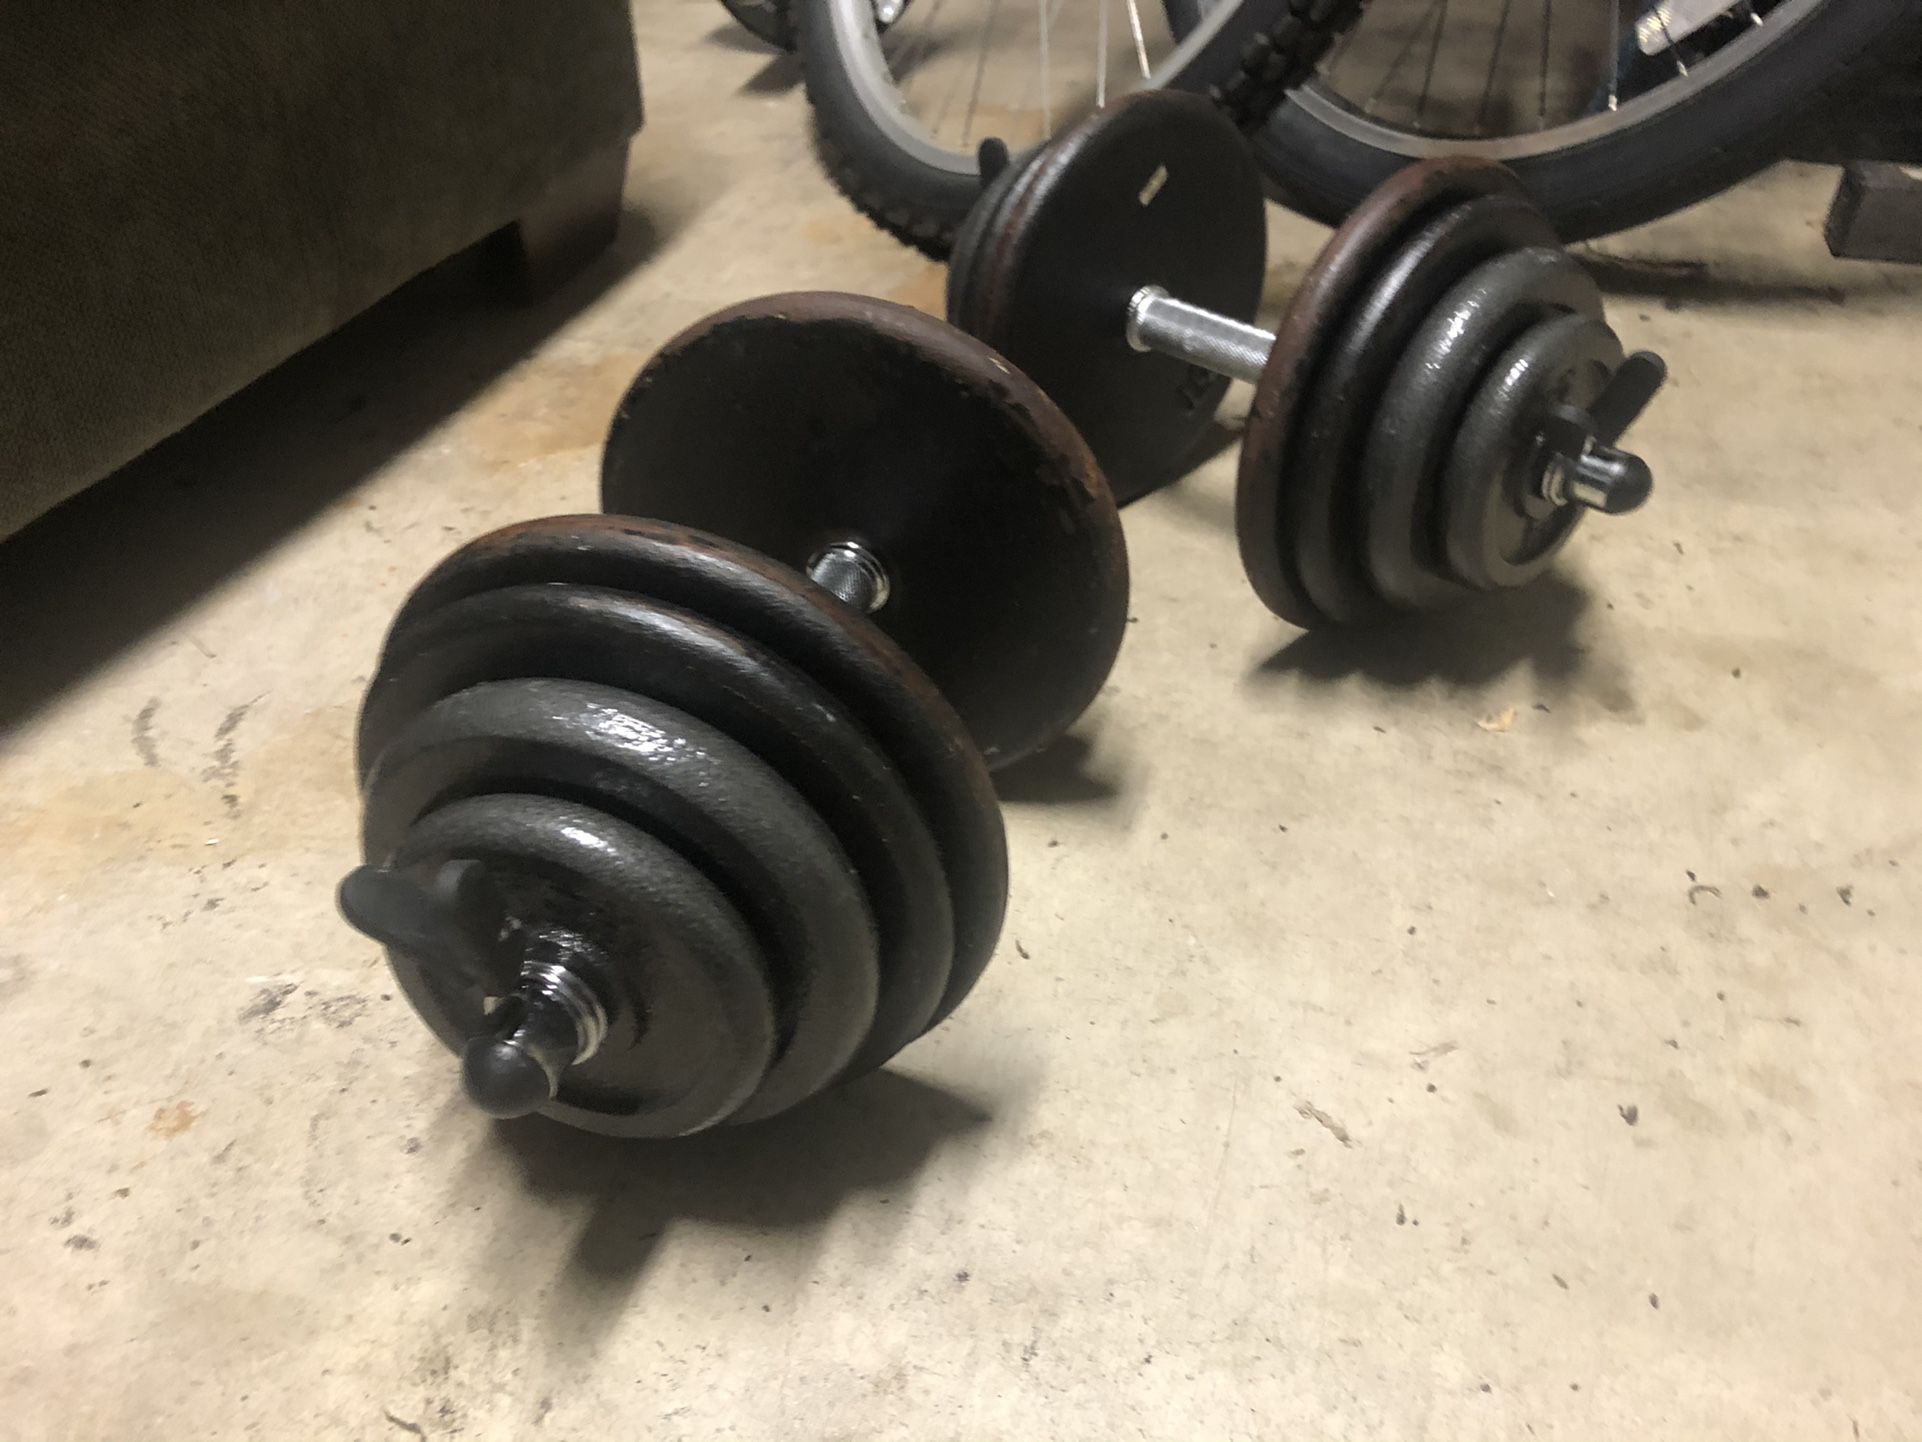 5-50lb’ers adjustable dumbbells In 5lb Increments heavy duty Weights